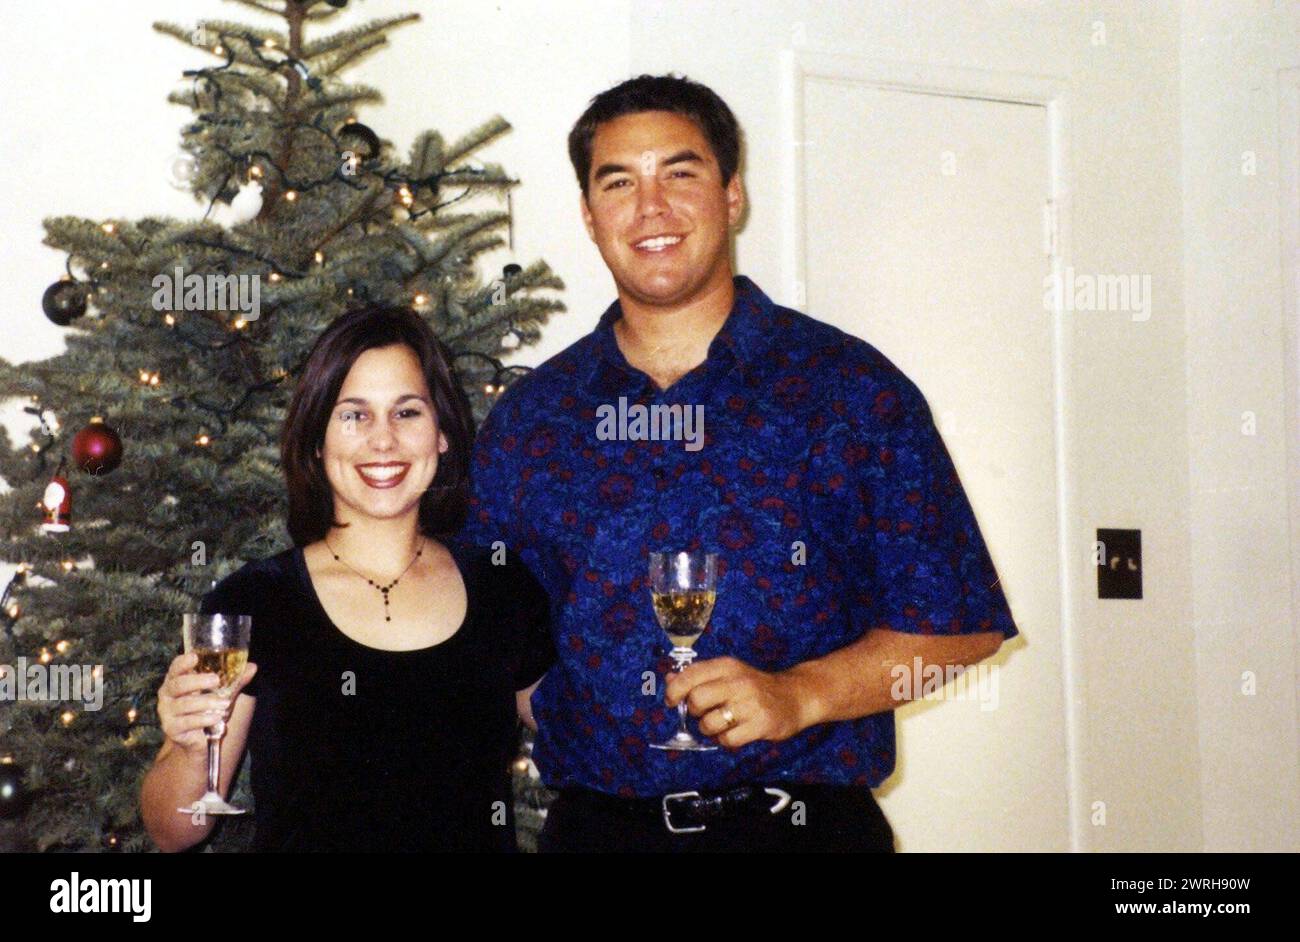 was declared guilty on two counts of murder Friday, November 12th, 2004. Pictured. 21st May, 2003. LACI PETERSON and SCOTT PETERSON shown in this picture taken right before Xmas 2002. Scott was arrested in San Diego on Friday, April 18, 2003 in connection with the Christmas Eve disappearance of his pregnant wife. Credit: ZUMA Press/ZUMAPRESS.com/Alamy Live News Stock Photo